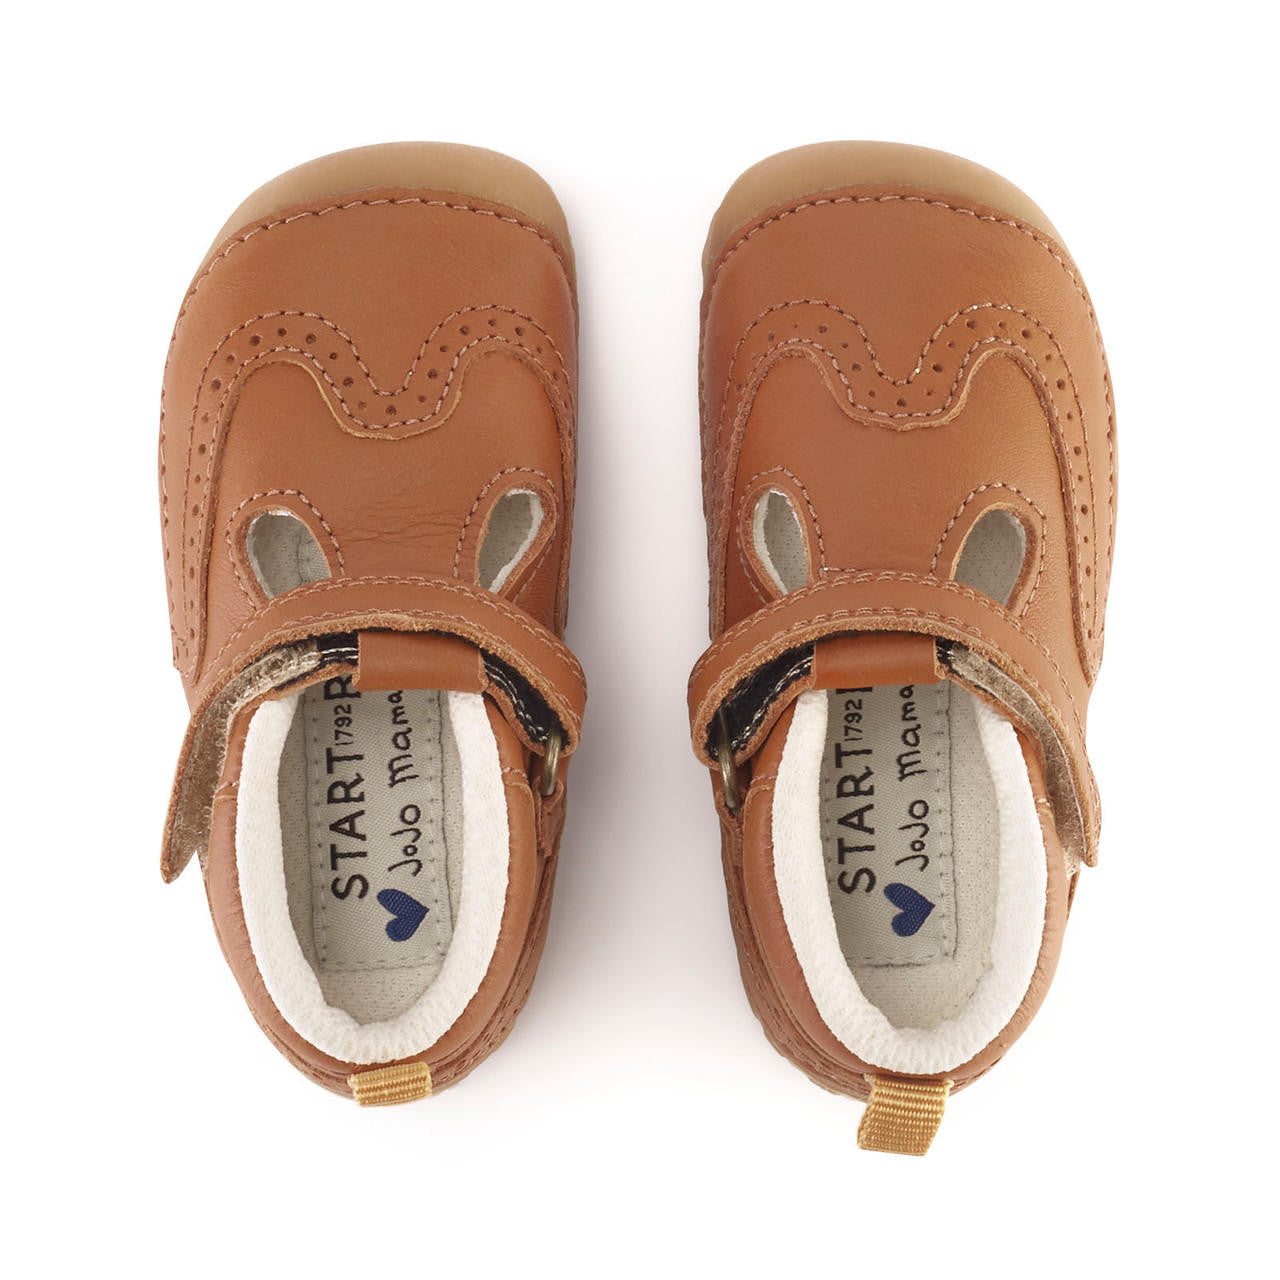 A pair of boys T-Bar pre-walkers by Start-Rite + JoJo Maman Bebe, style Share,in tan leather with brogue detail and toe bumper. Velcro fastening. Right side view.